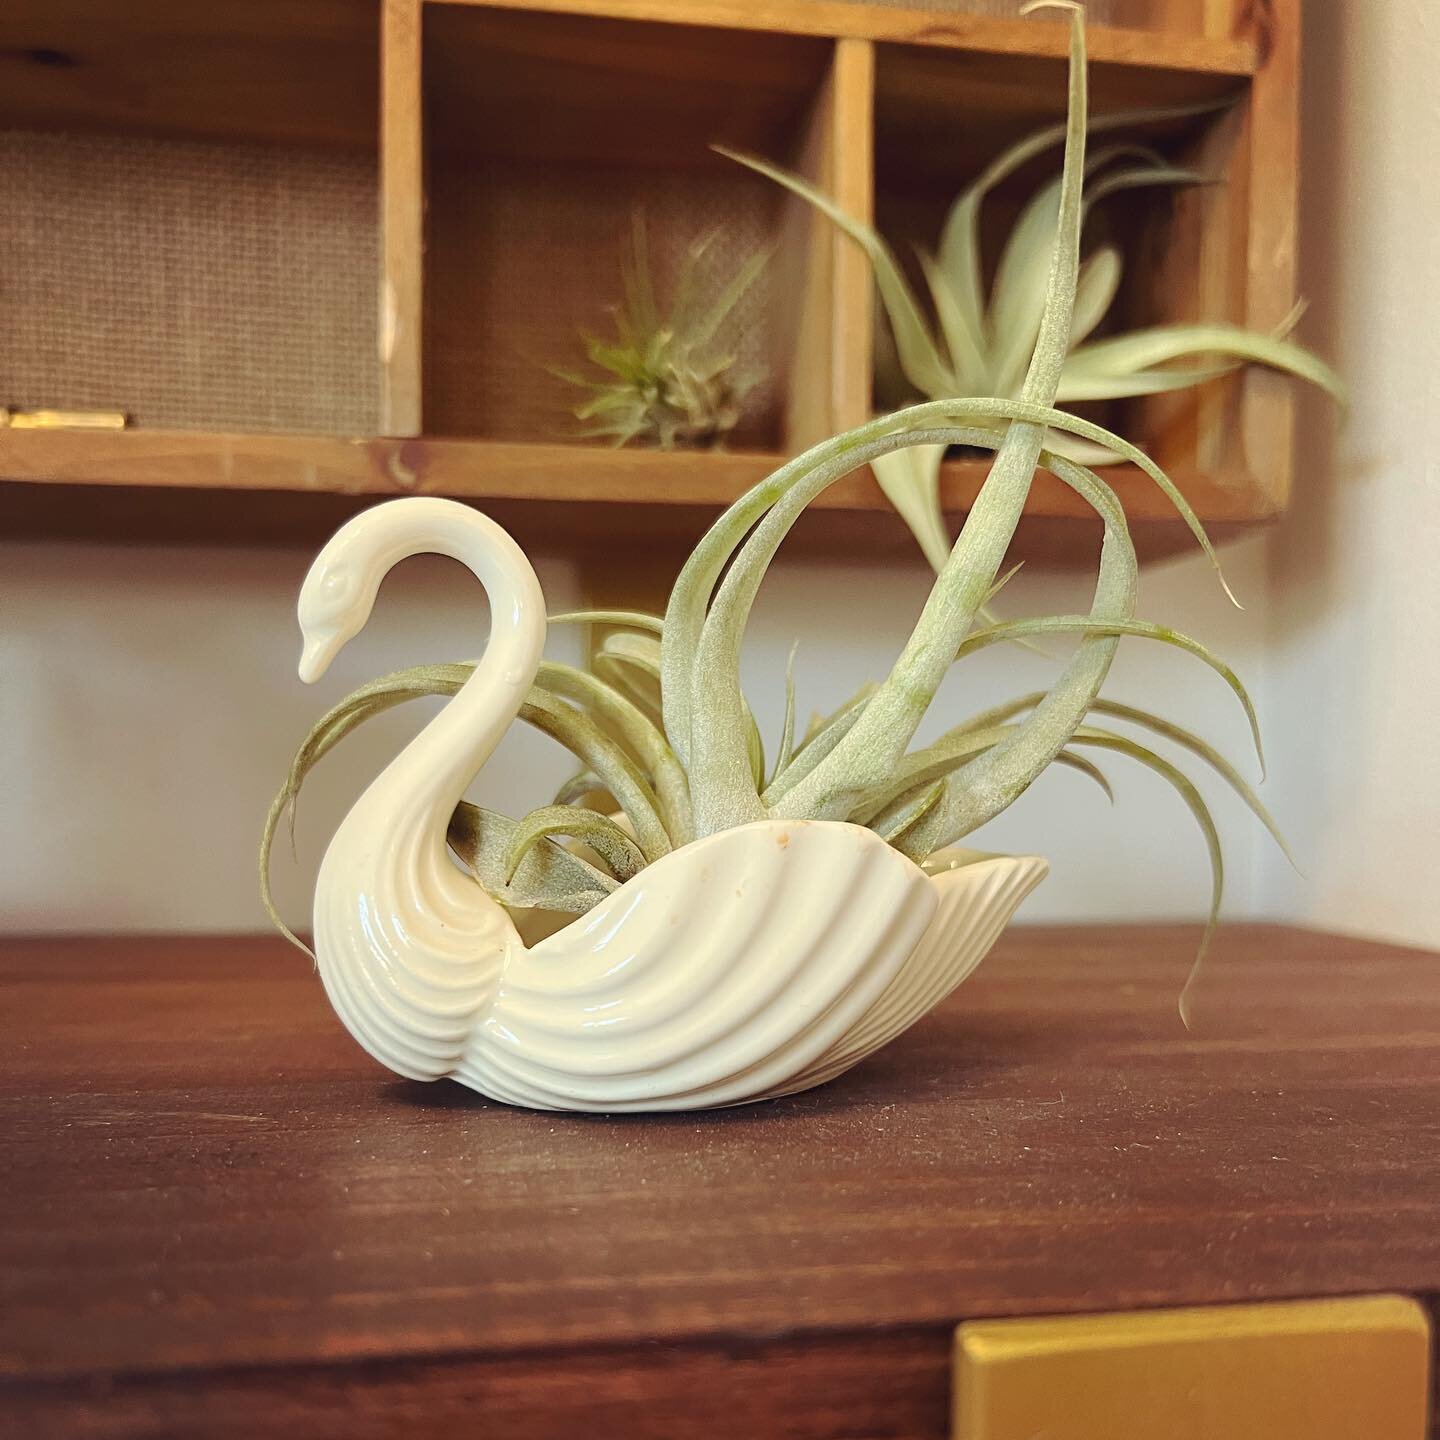 Everything's a plant holder 🌱 
Vintage Swan w/ medium airplant-$20 + tax
Venmo to hold , pickup @theshopon7 

Airplant Care Instructions:
✨ Submerge in water once a week for a few minutes! 
✨Compliment daily 

#theshopon7 #518shopgirls #vintage #pla